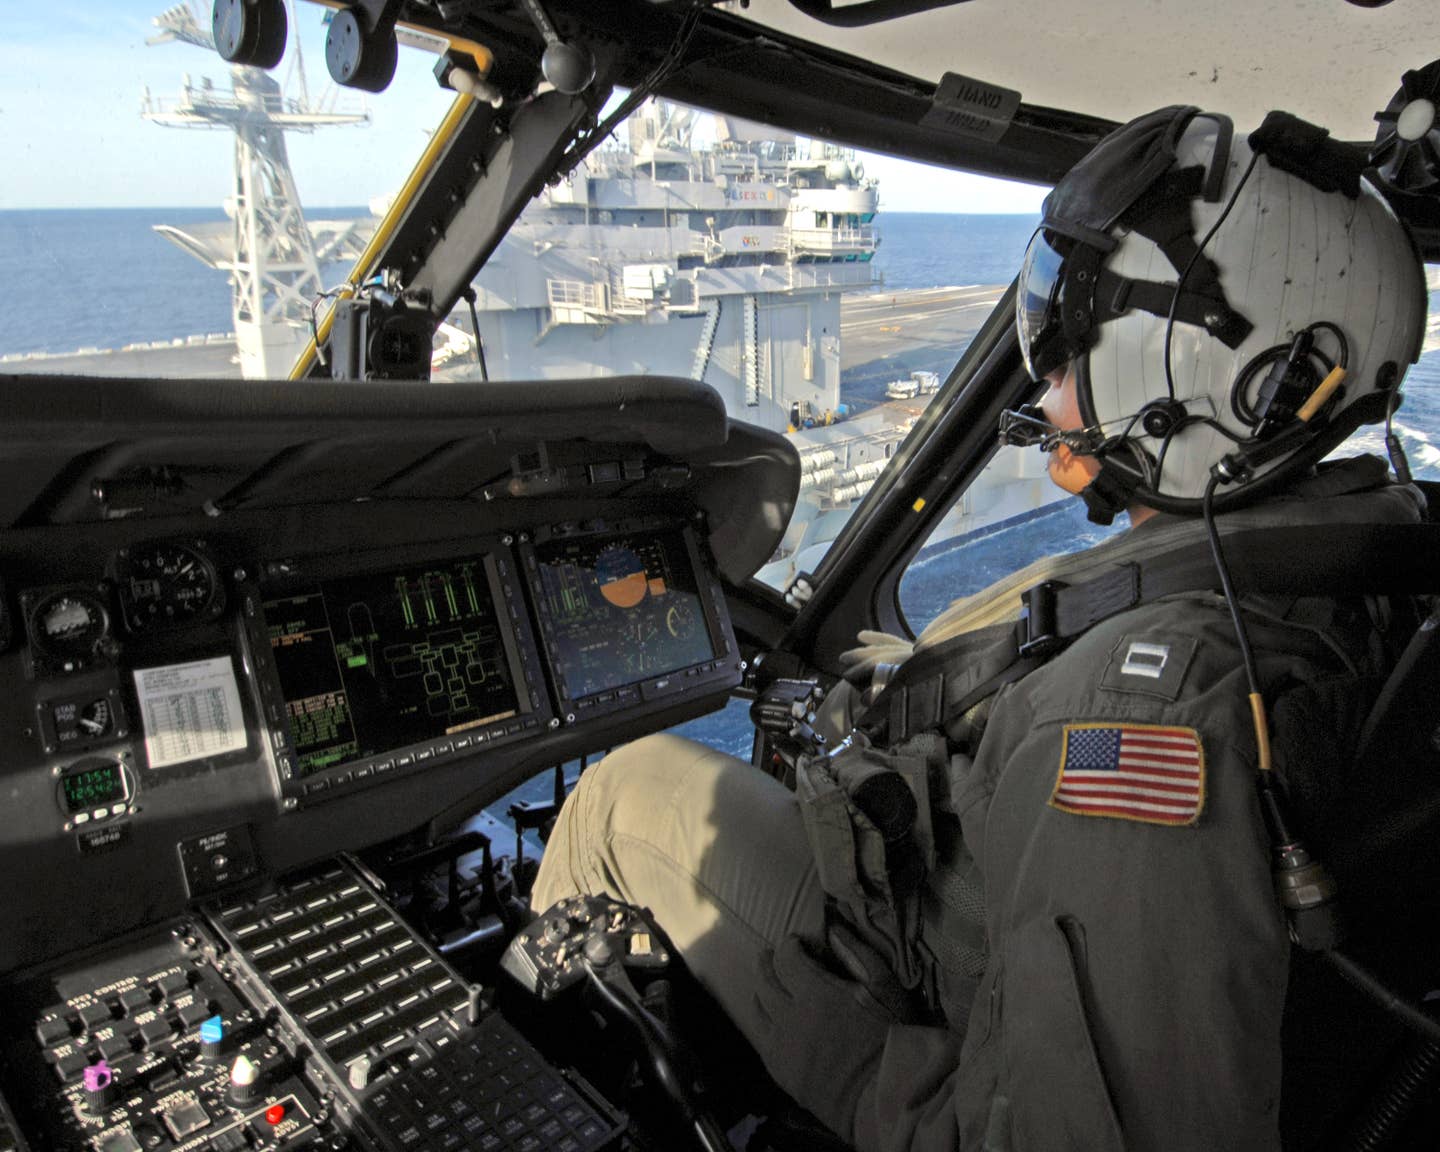 message-editor%2F1573114174500-us_navy_061217-n-9708h-239_lt._jarrod_groves_prepares_to_land_an_mh-60s_helicopter_assigned_to_the_chargers_of_helicopter_sea_combat_squadron_two_six_hsc-26_aboard_the_nimitz-class_aircraft_carrier_uss_theodore_roosevelt_cvn.jpg